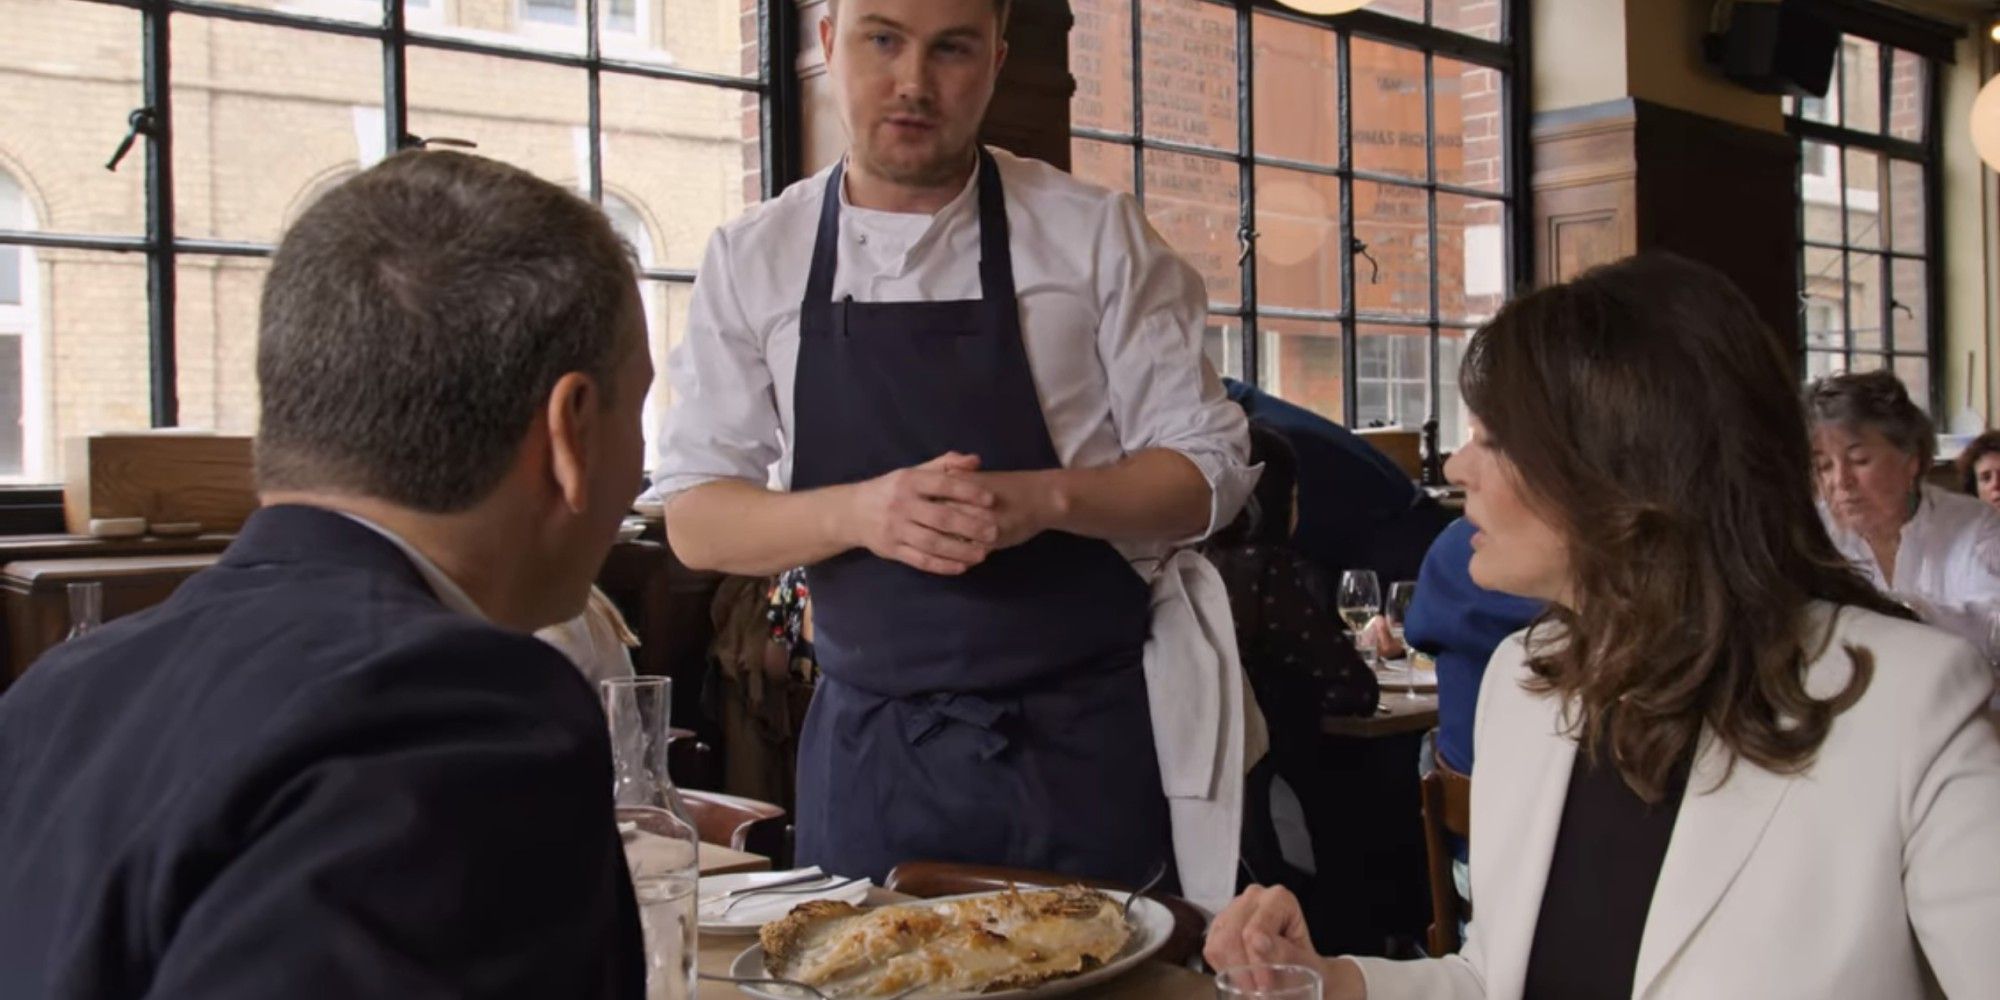 Phil talking to waiter with Nigella Lawson at Brat Restaurant in Somebody Feed Phil season 3 episode 3